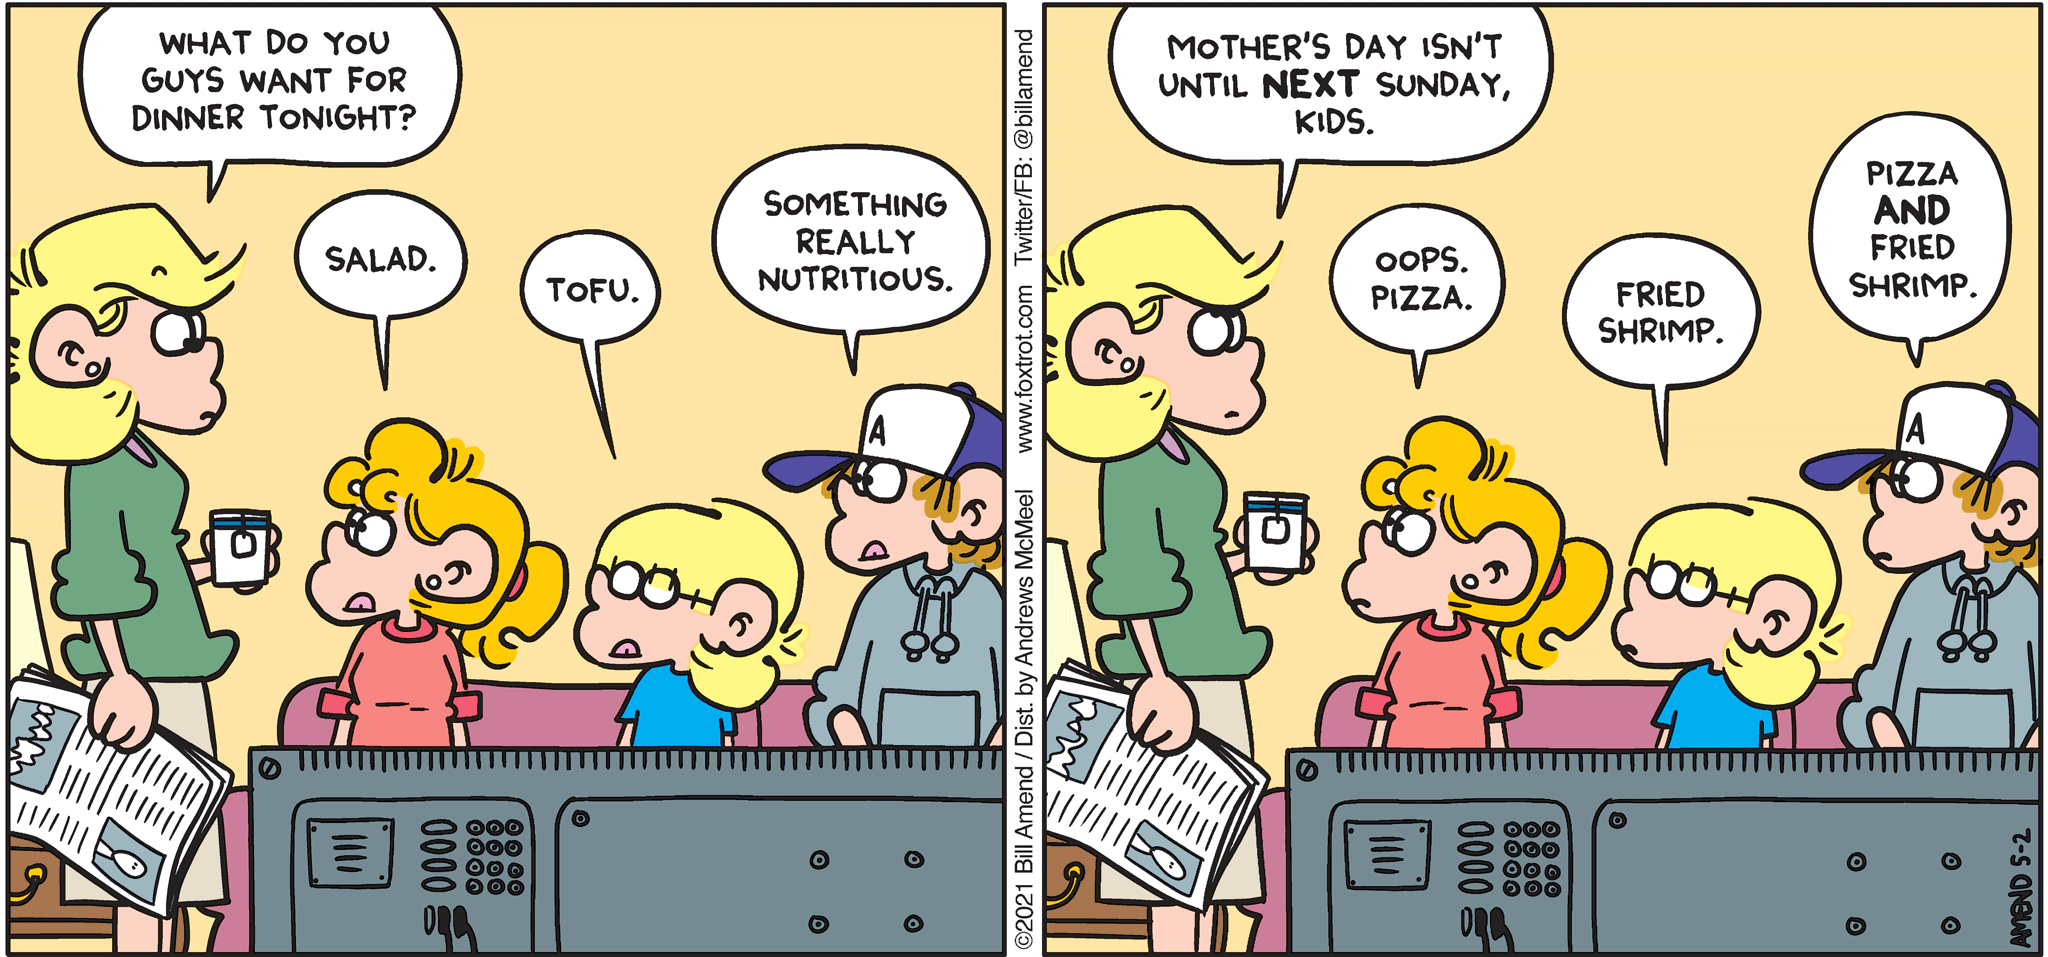 FoxTrot comic strip by Bill Amend - "Week Off" published May 2, 2021 - Andy Fox: What do you guys want for dinner tonight? Paige Fox: Salad. Jason Fox: Tofu. Peter Fox: Something really nutritious. Andy Fox: Mother's Day isn't until NEXT Sunday, kids. Paige Fox: Oops. Pizza. Jason Fox: Fried shrimp. Peter Fox: Pizza AND fried shrimp.